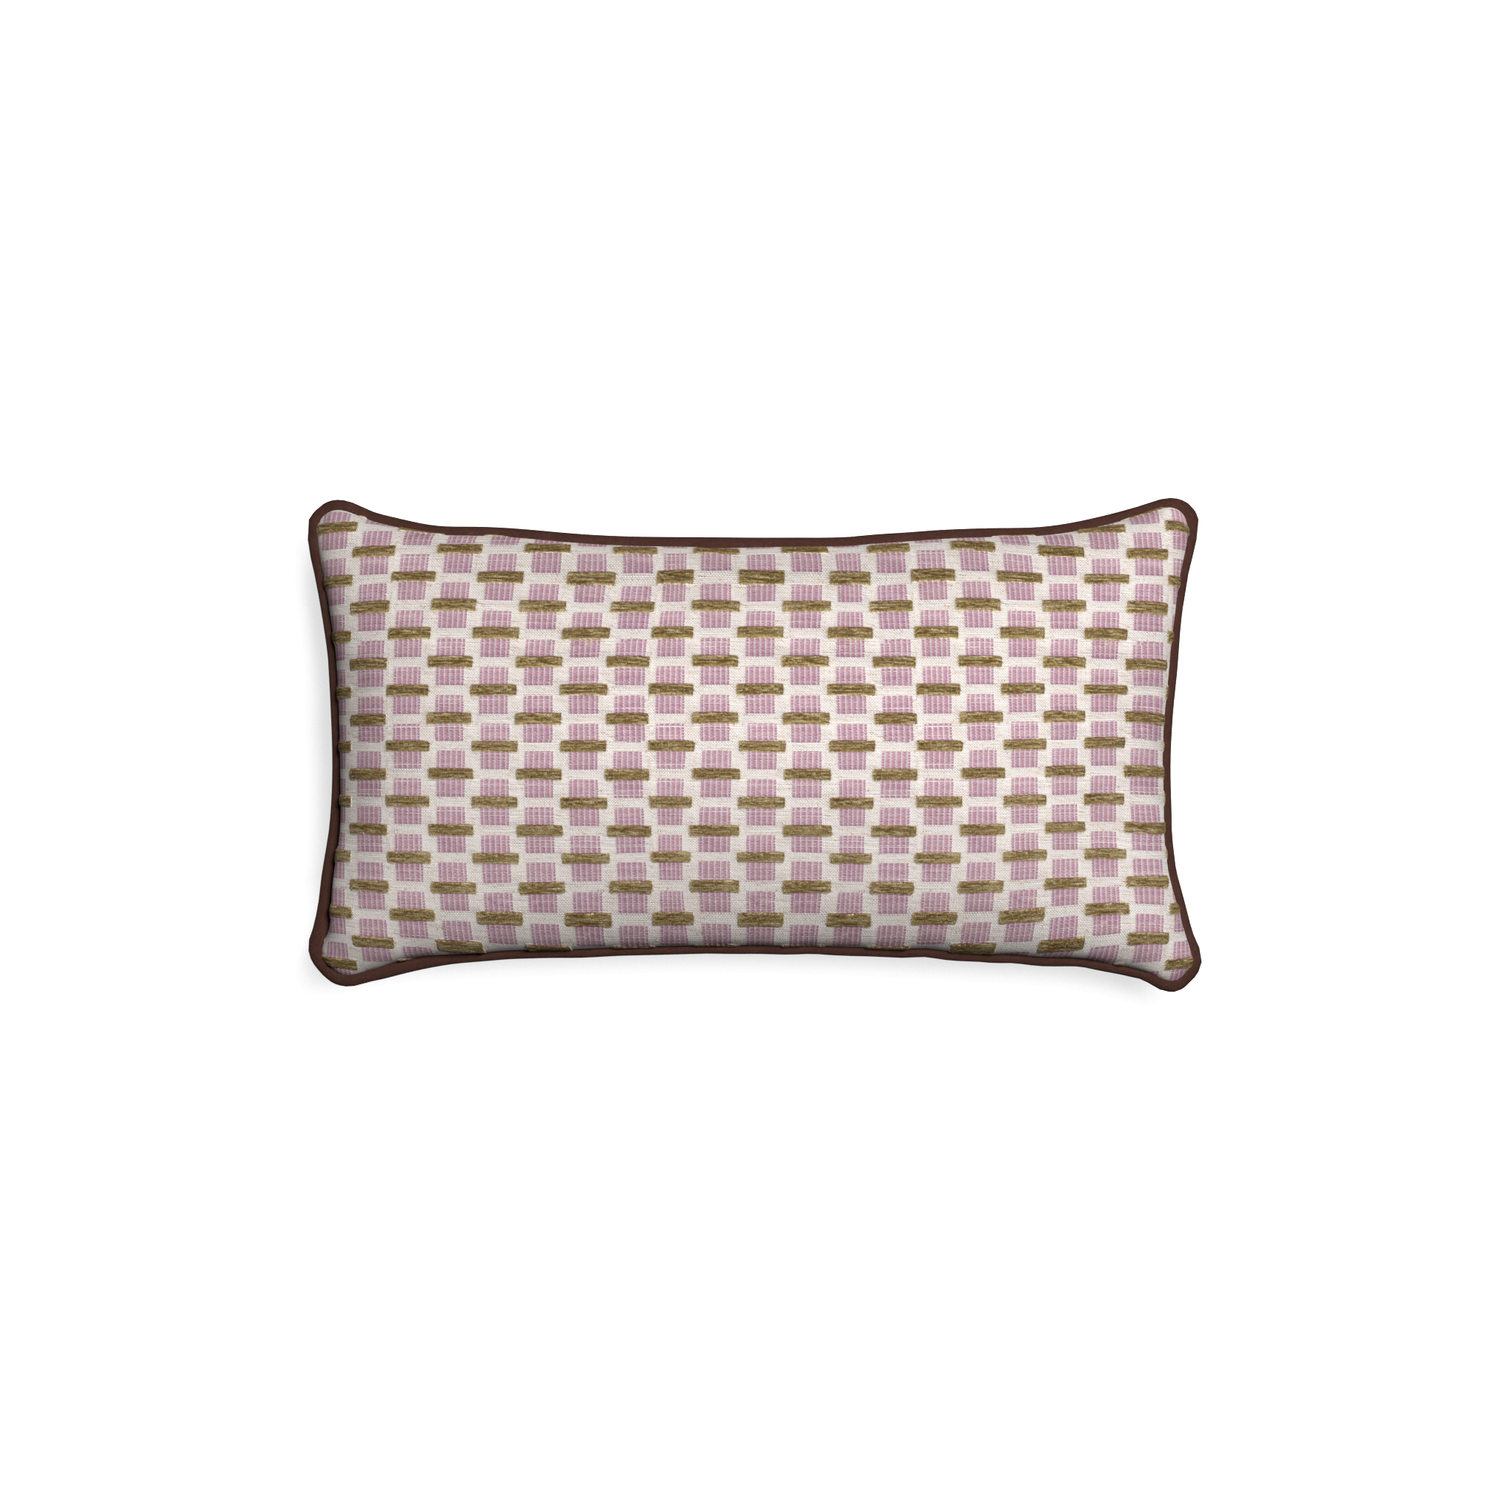 Petite-lumbar willow orchid custom pink geometric chenillepillow with w piping on white background